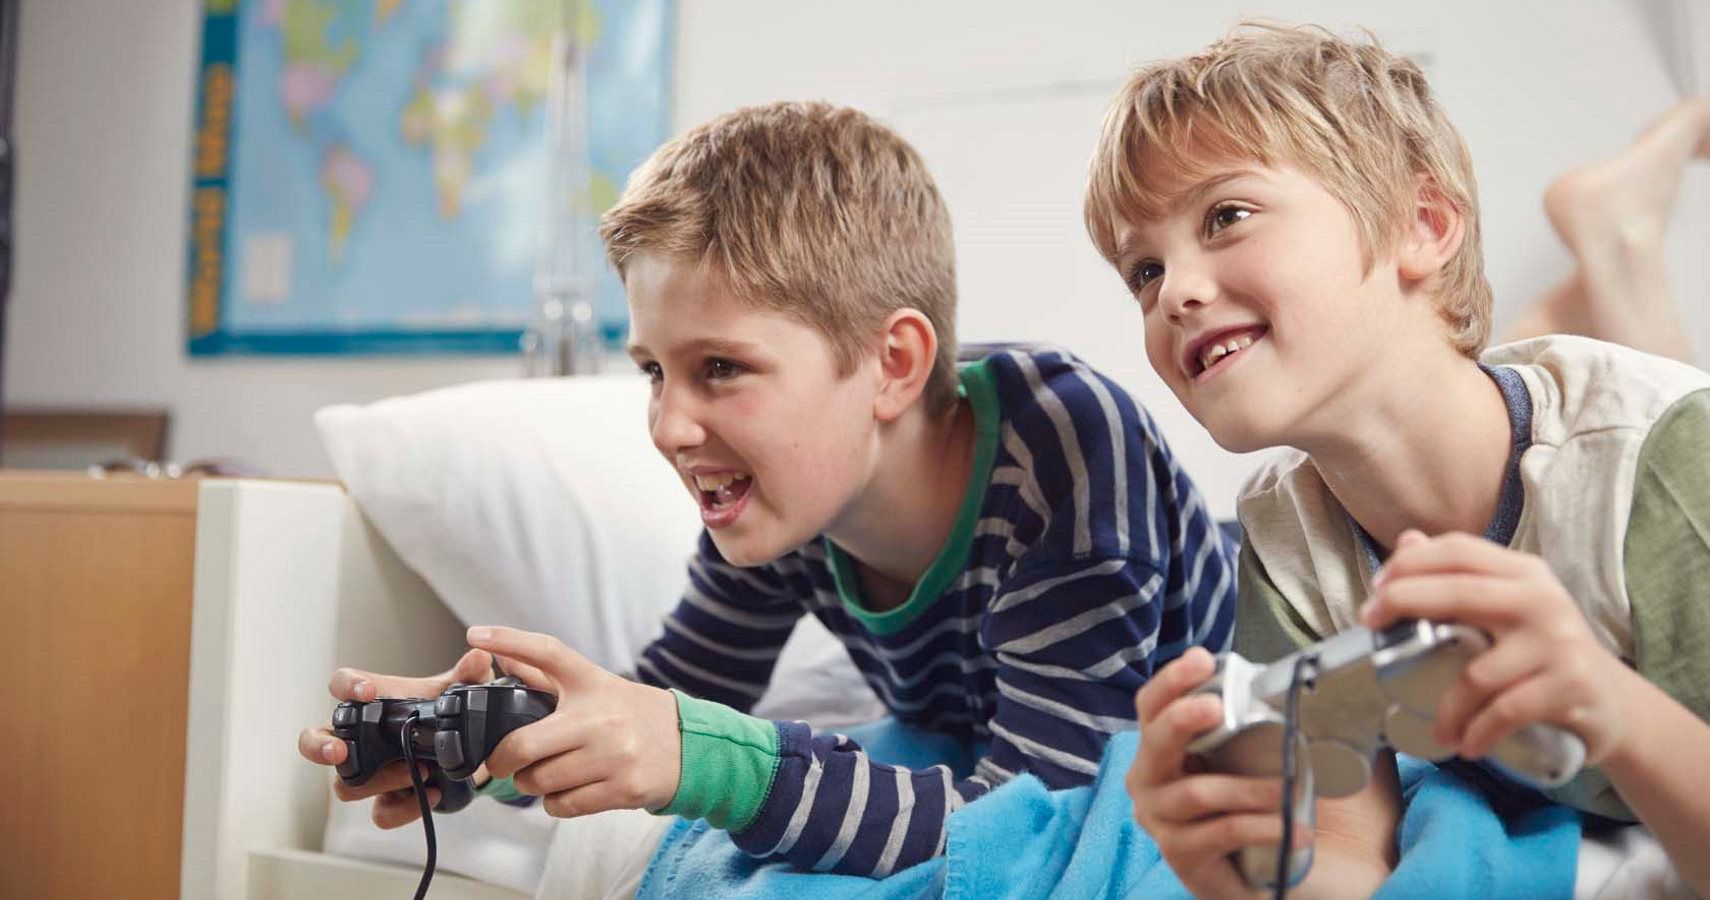 Study Suggests Gender Age Play A Part But Gaming Does Not Really Impact Social Development In Children